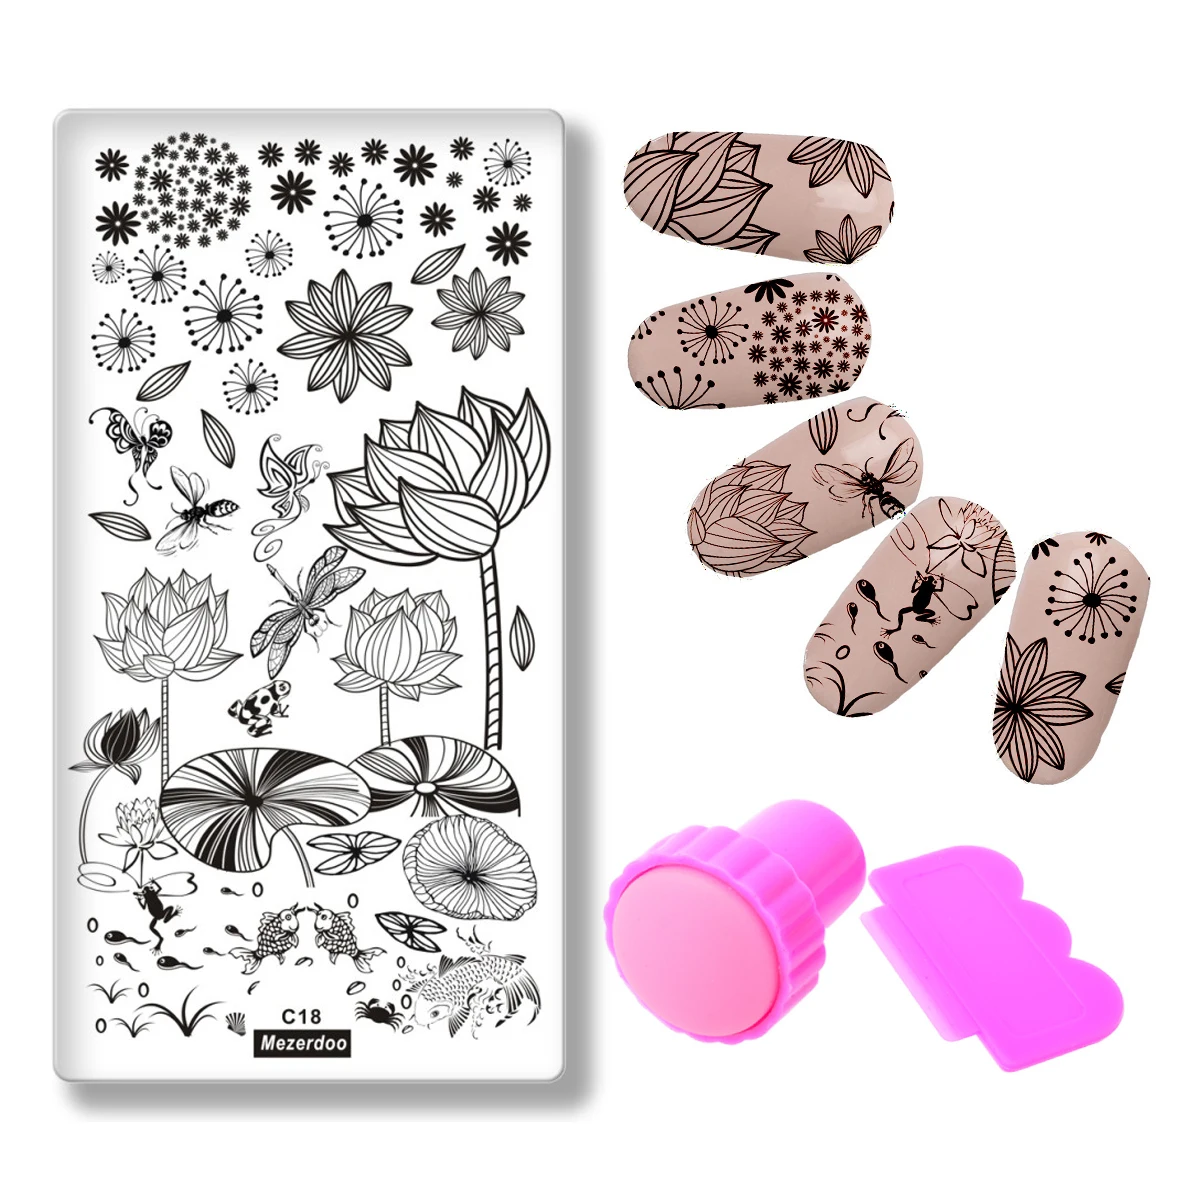 

Summer Theme Nail Template+Pink Stamper Scraper Lotus Pond Goldfish Frog Designs Nail Stencil Dragonfly Butterfly Patterns Deco